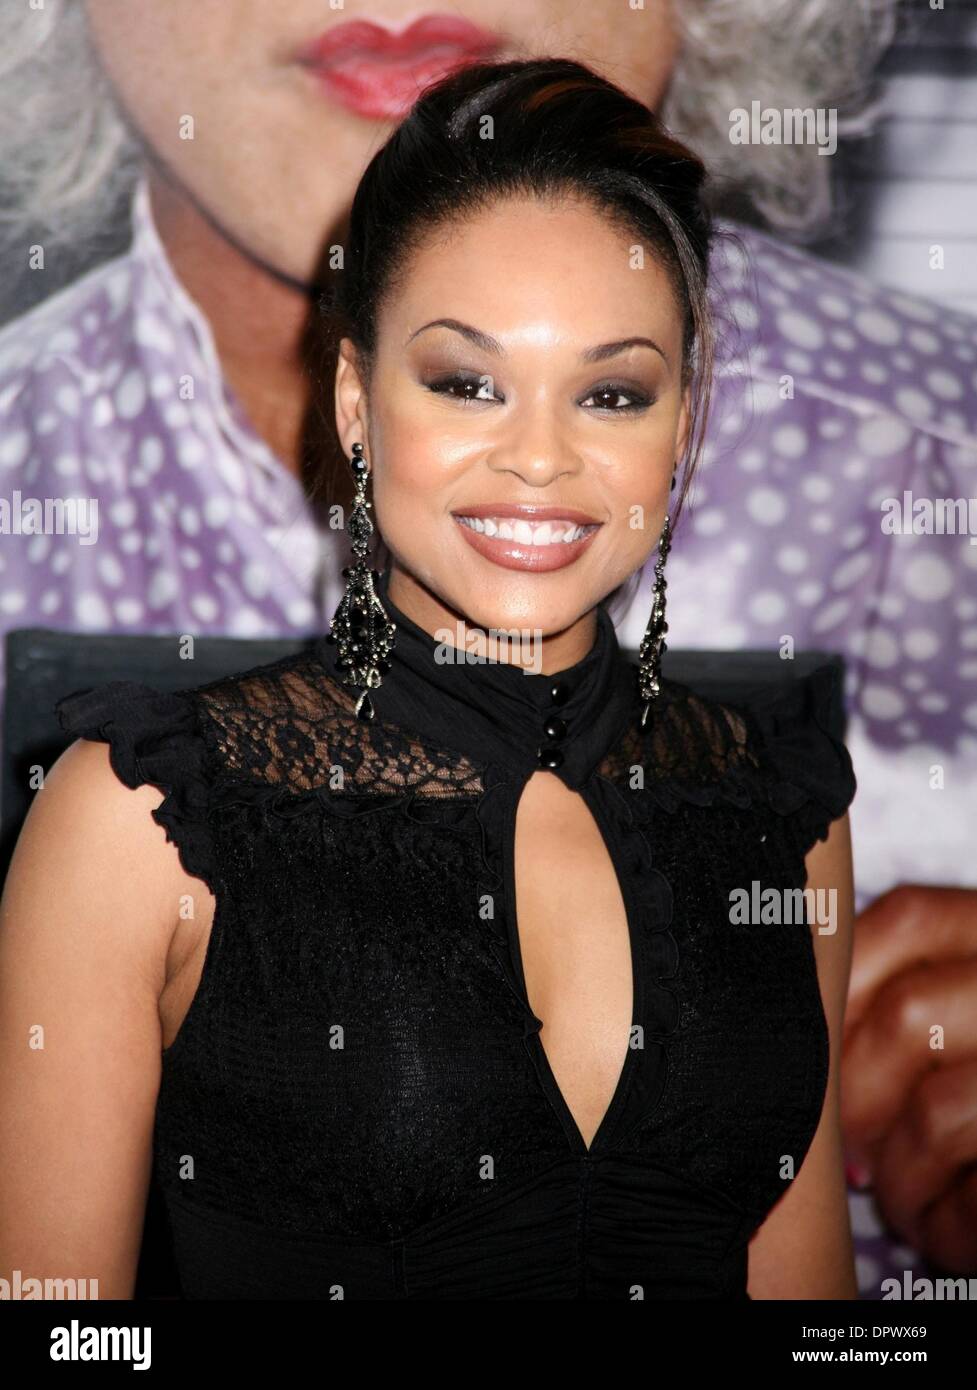 Feb 18, 2009 - New York, New York, USA - Actress DEMETRIA MCKINNEY attends the special screening of 'Tyler Perry's Madea Goes to Jail' held at the AMC Loews Lincoln Center Theater. (Credit Image: Â© Nancy Kaszerman) Stock Photo